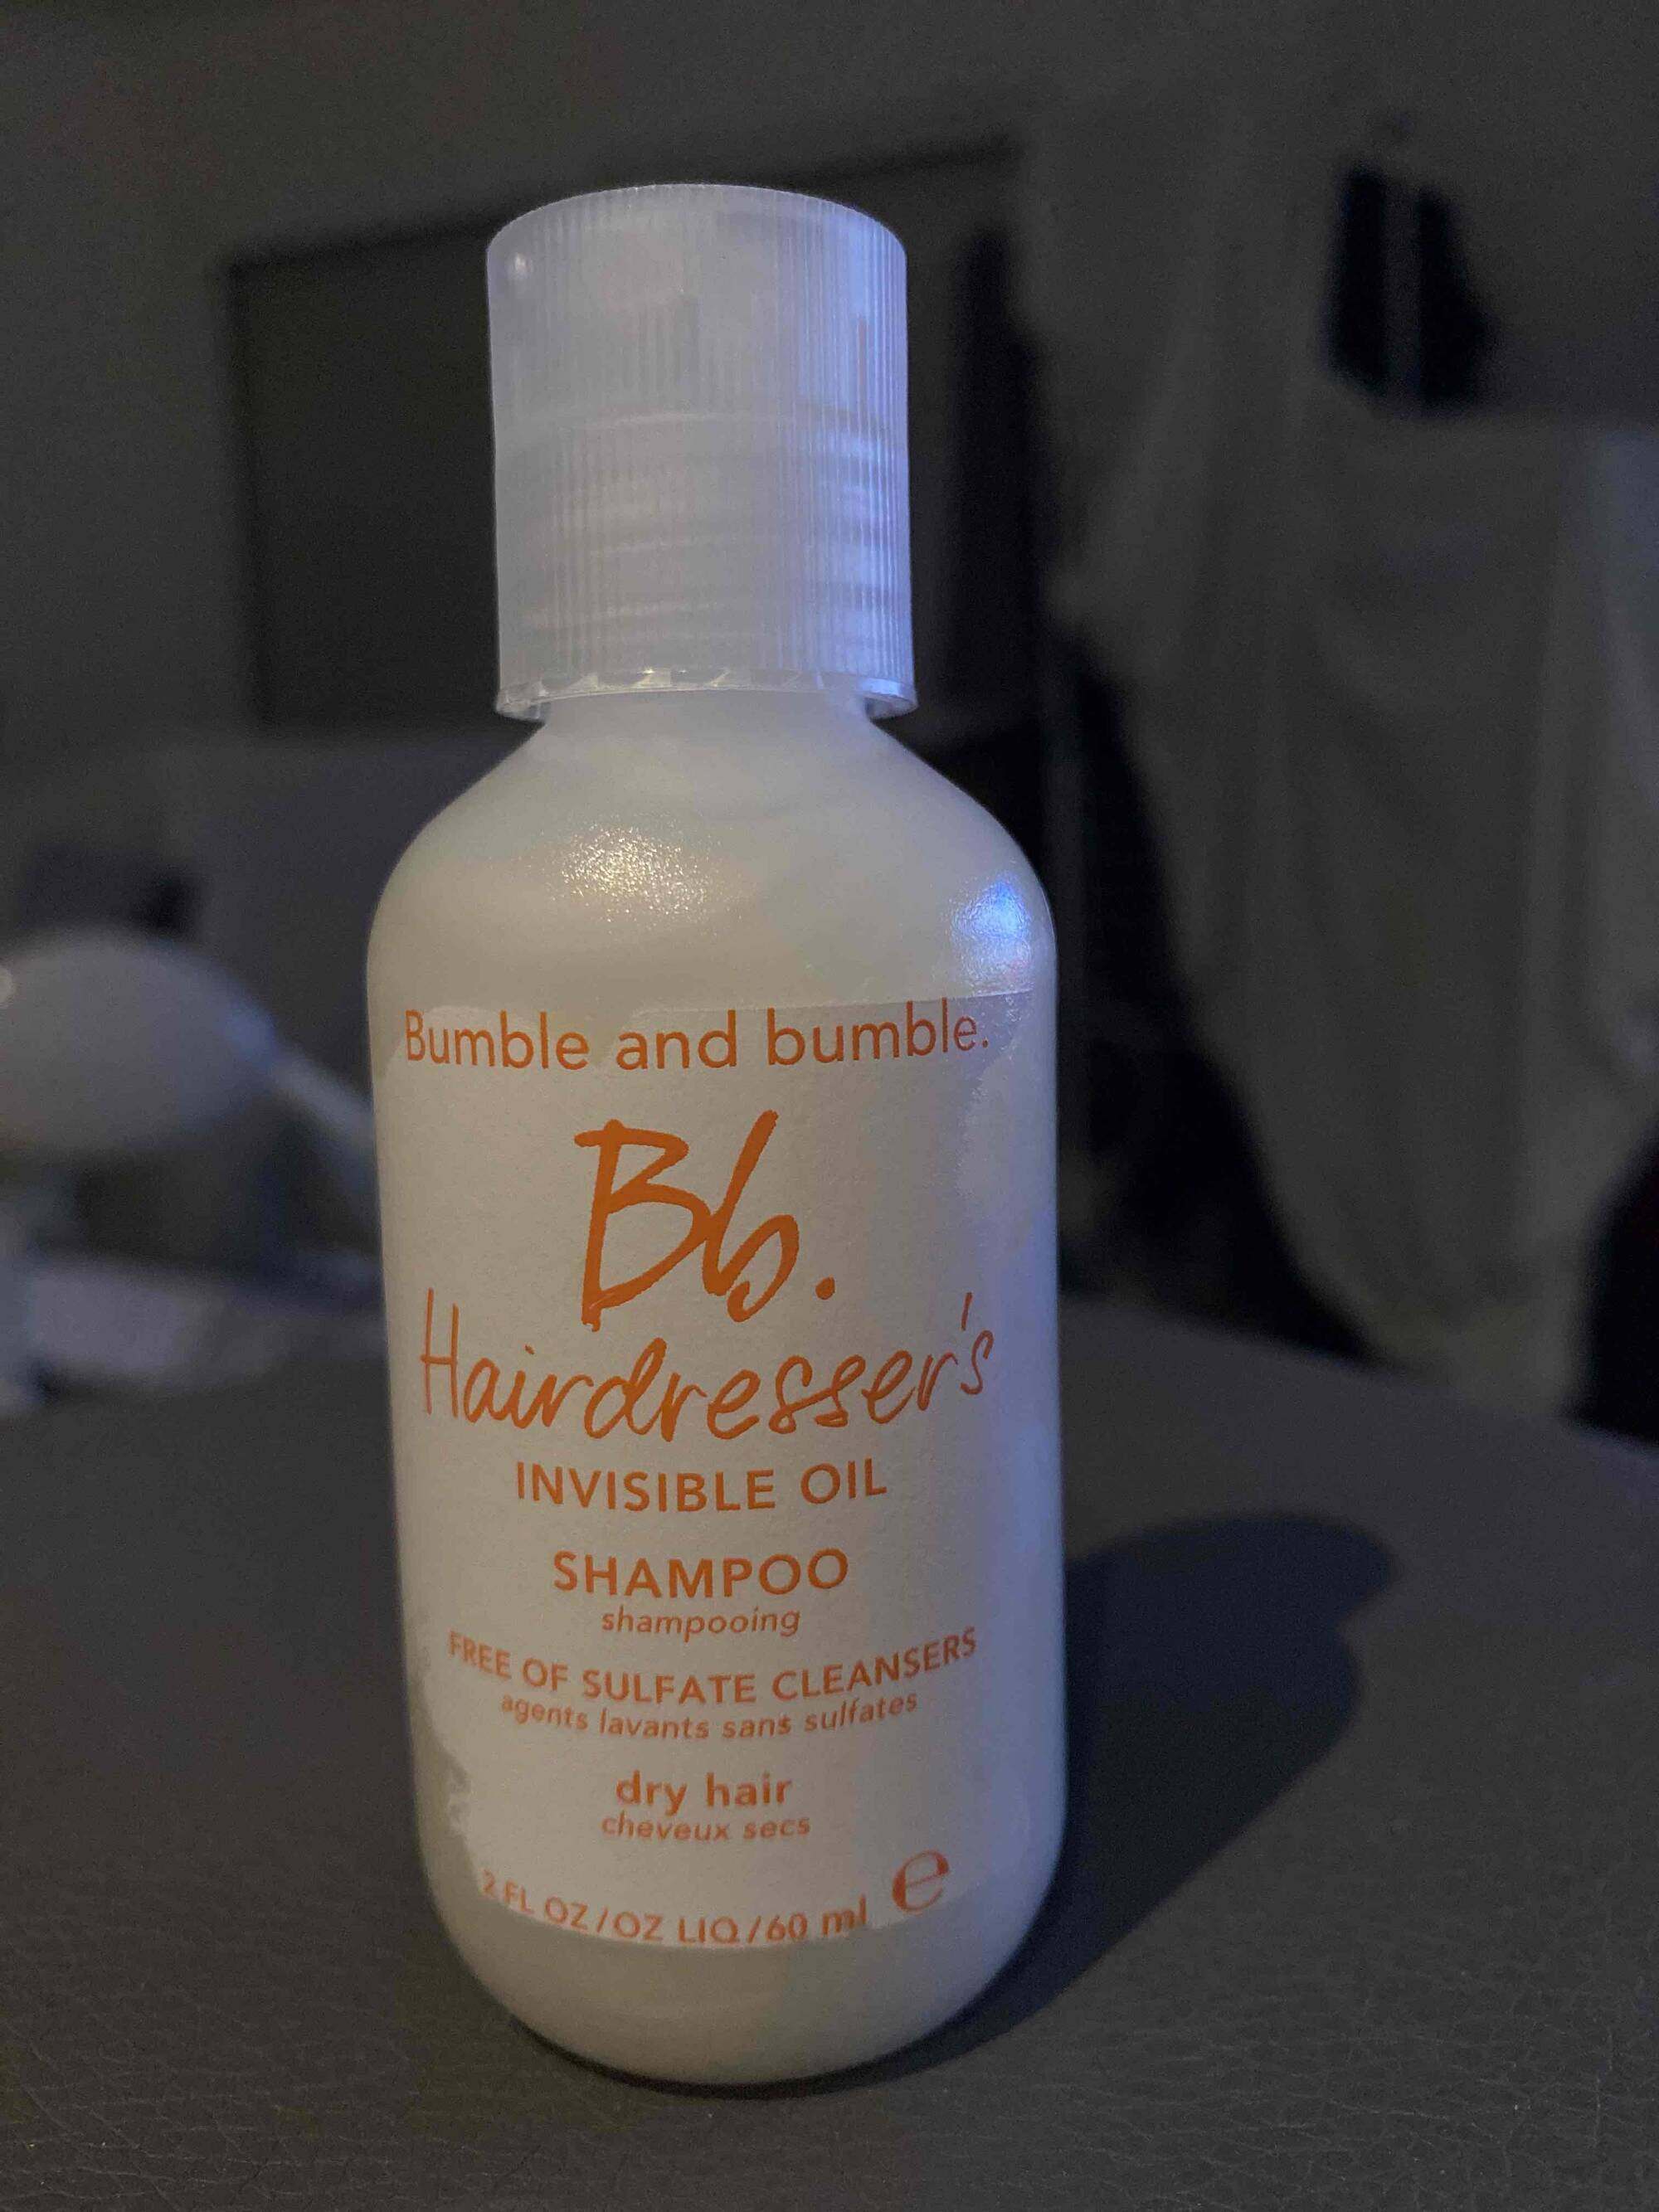 BUMBLE AND BUMBLE - Bb. Hairdresser’s - Shampoo